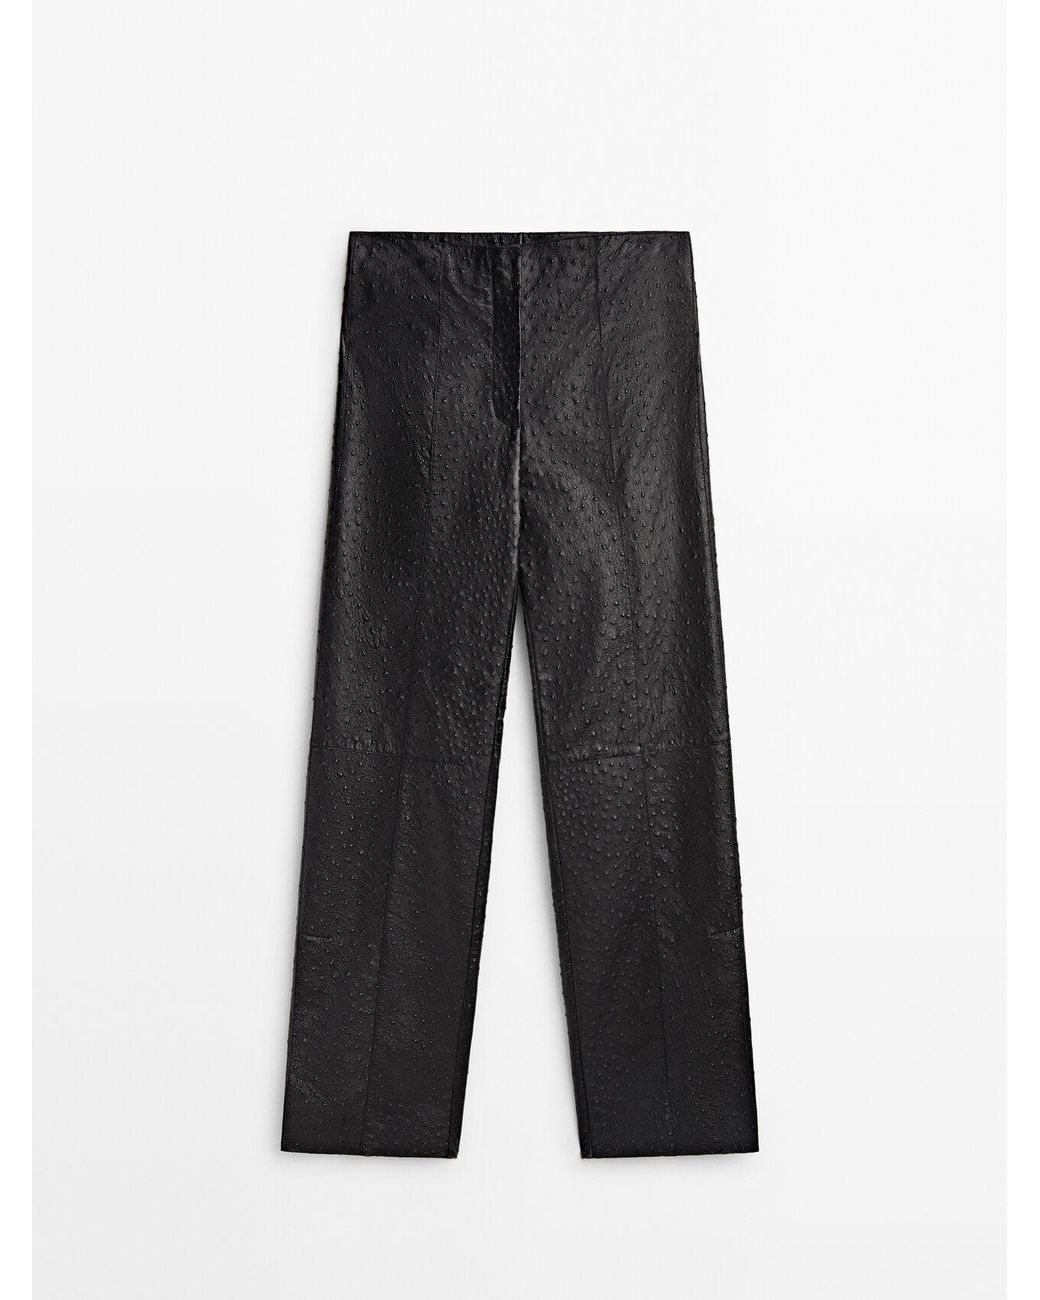 MASSIMO DUTTI Embossed Nappa Leather Trousers in Black | Lyst